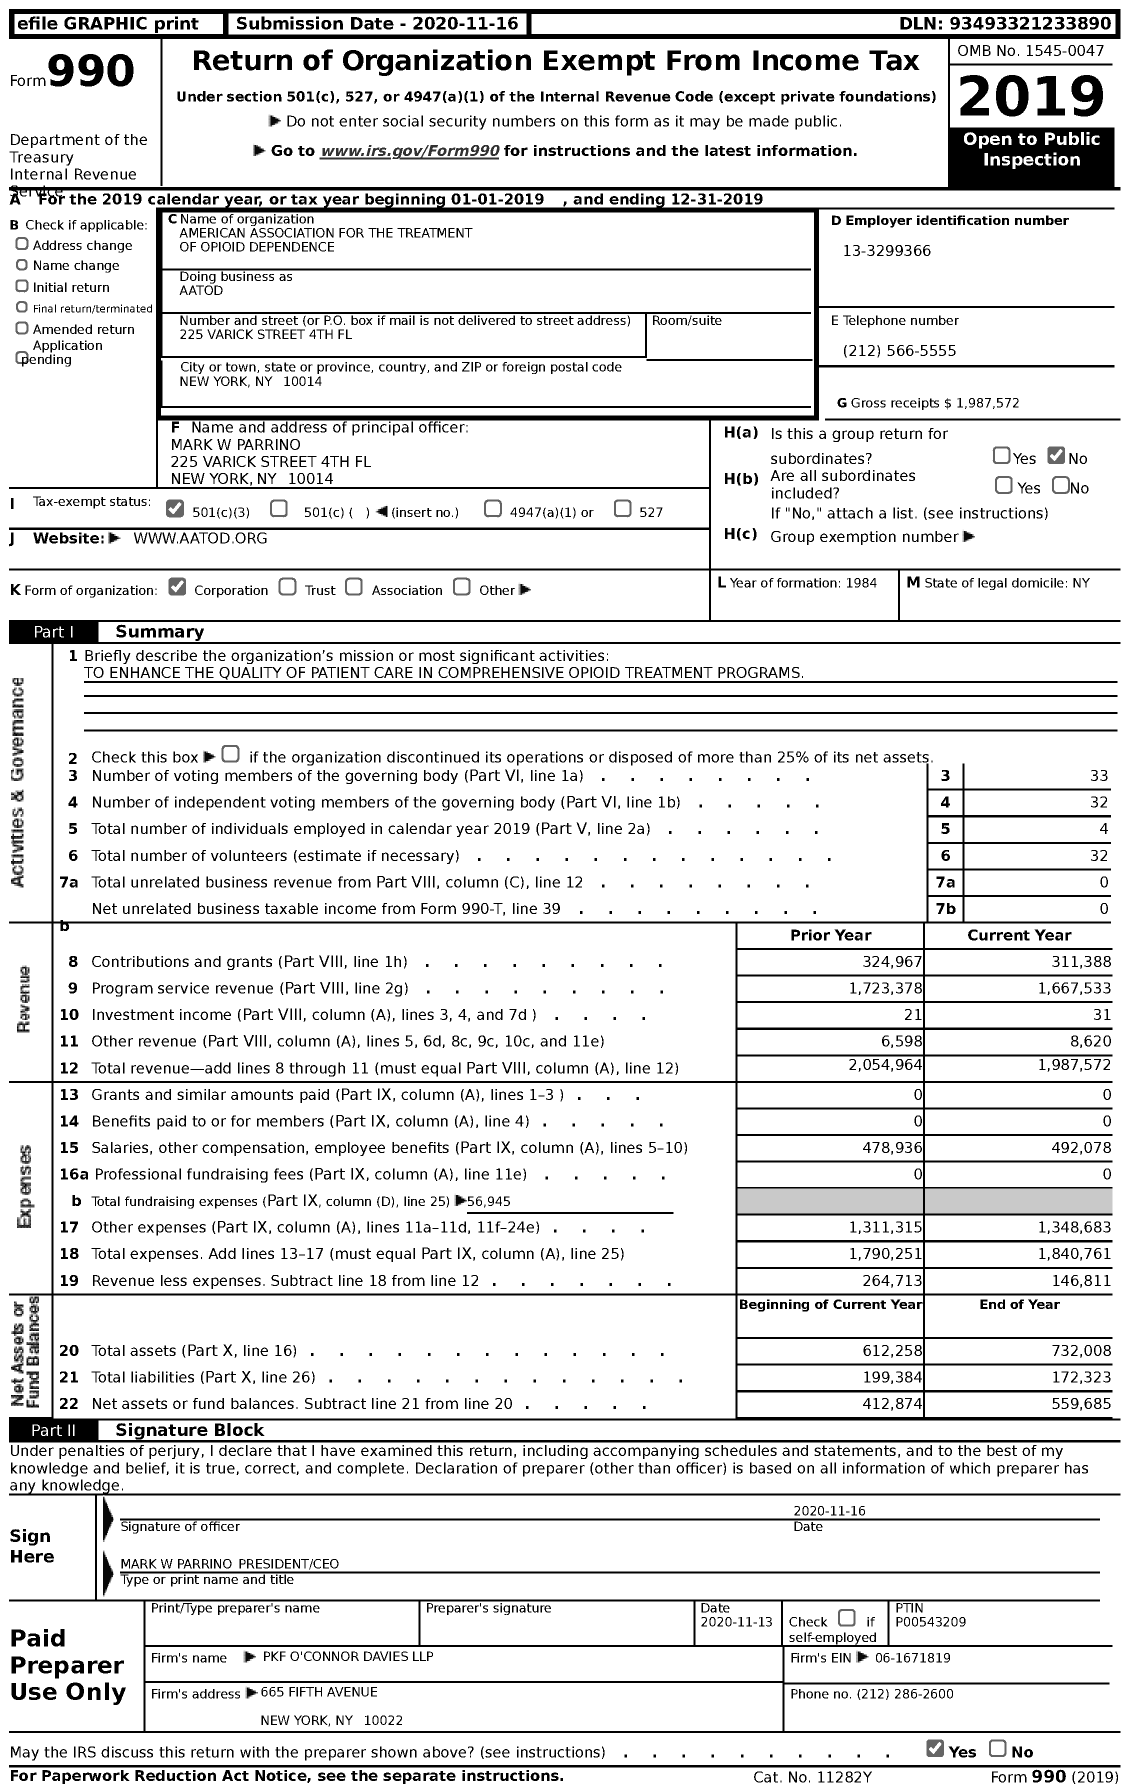 Image of first page of 2019 Form 990 for The American Association for the Treatment of Opioid Dependence (AATOD)